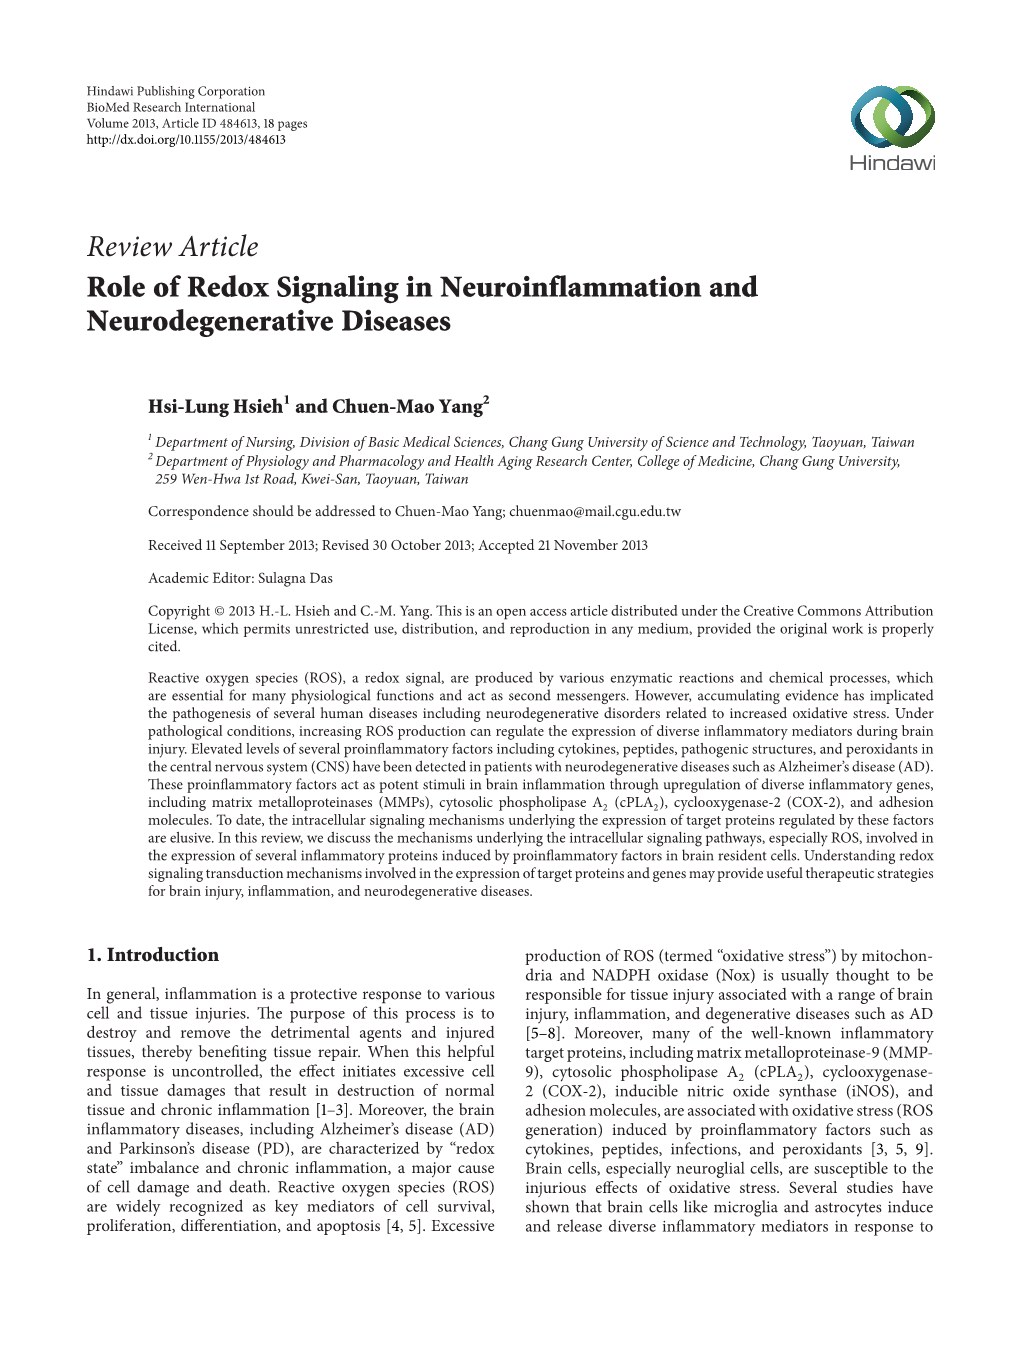 Review Article Role of Redox Signaling in Neuroinflammation and Neurodegenerative Diseases